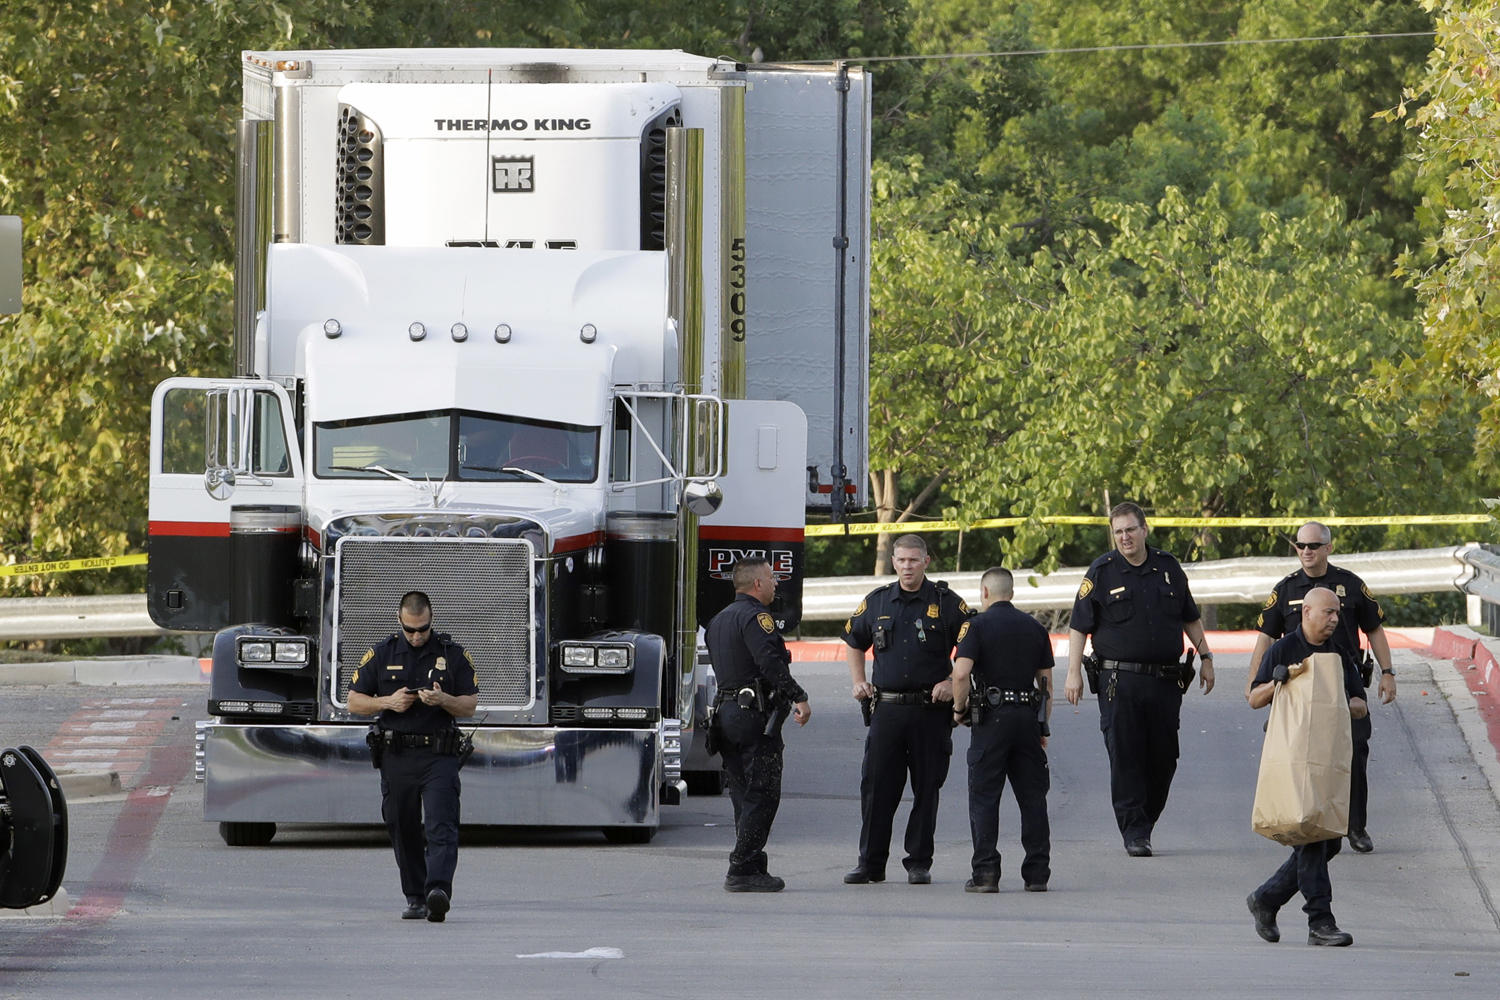 San Antonio police officers investigate the scene where eight people were found dead in a tractor-trailer loaded with at least 30 others outside a Walmart store in stifling summer heat in what police are calling a horrific human trafficking case, Sunday, July 23, 2017, in San Antonio. (Eric Gay/AP)